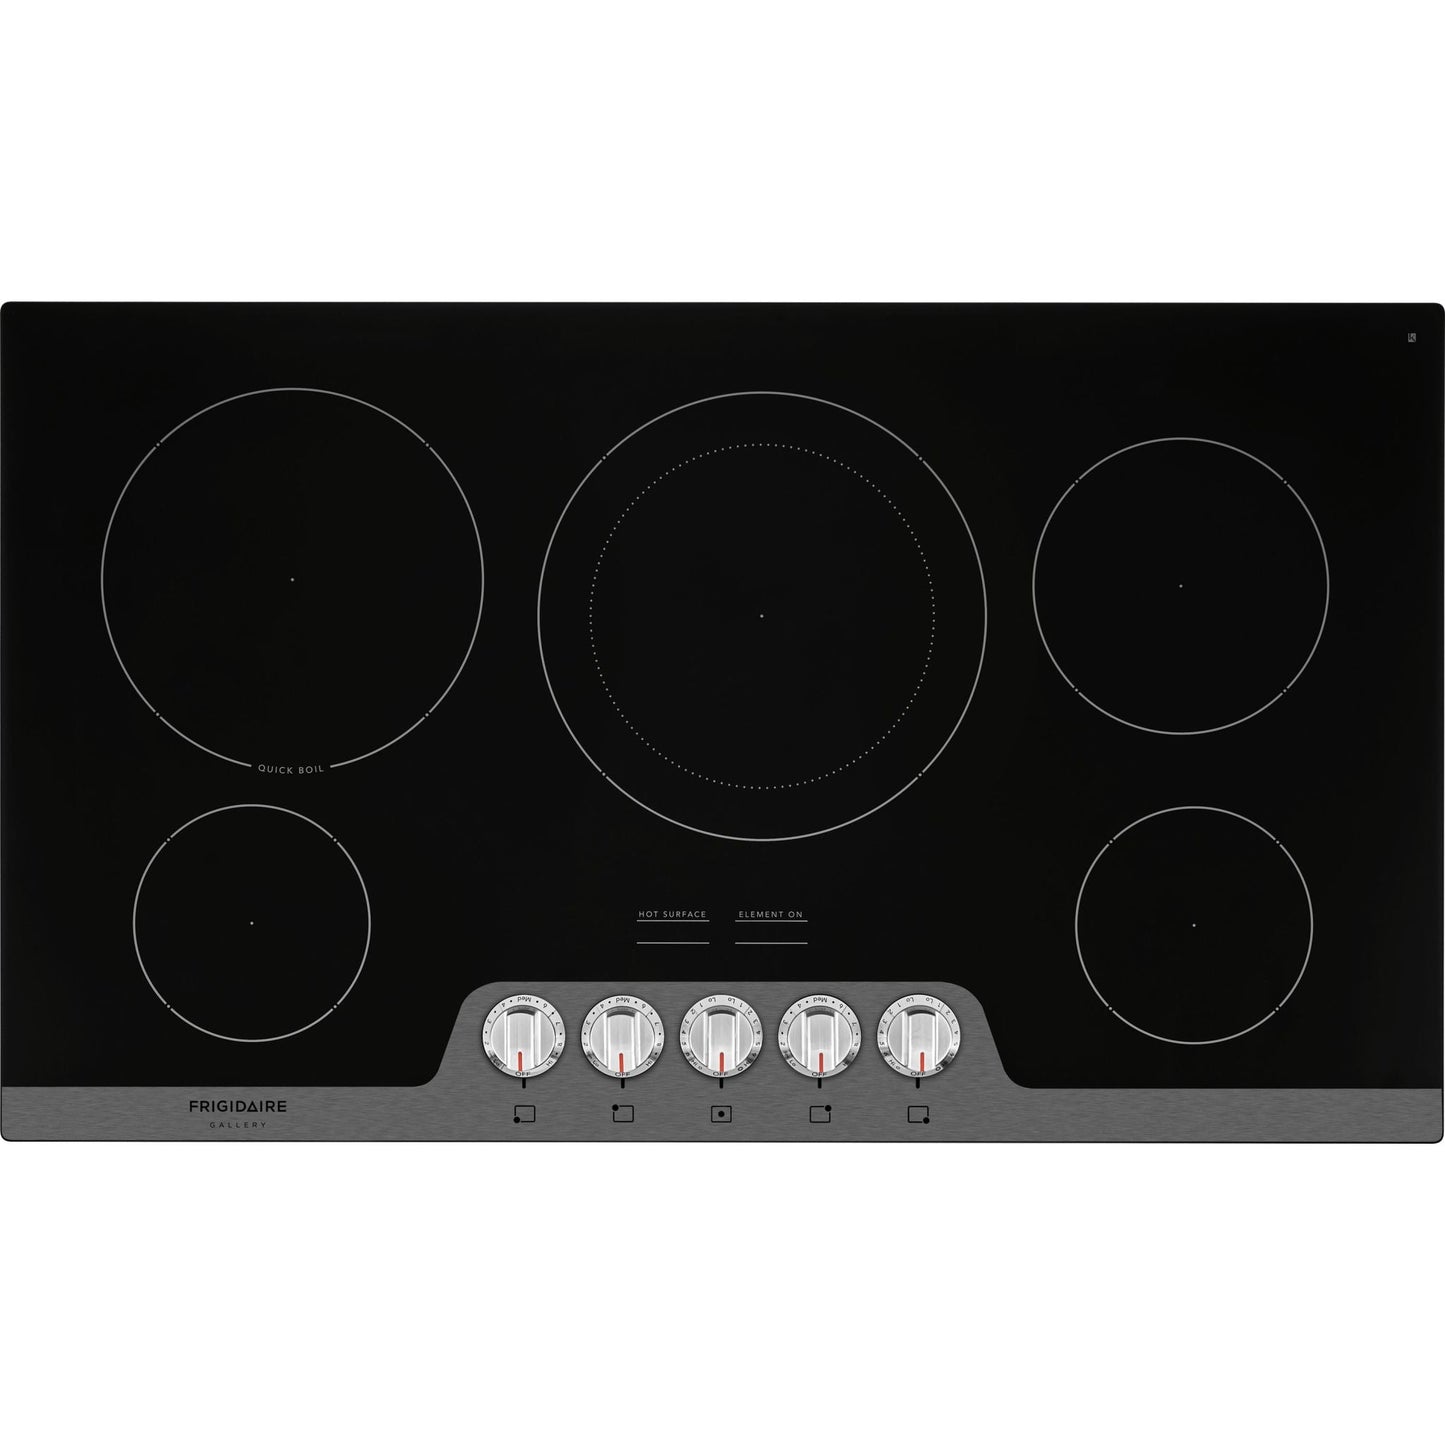 Frigidaire Gallery 36" Cooktop (FGEC3648US) - Stainless Steel